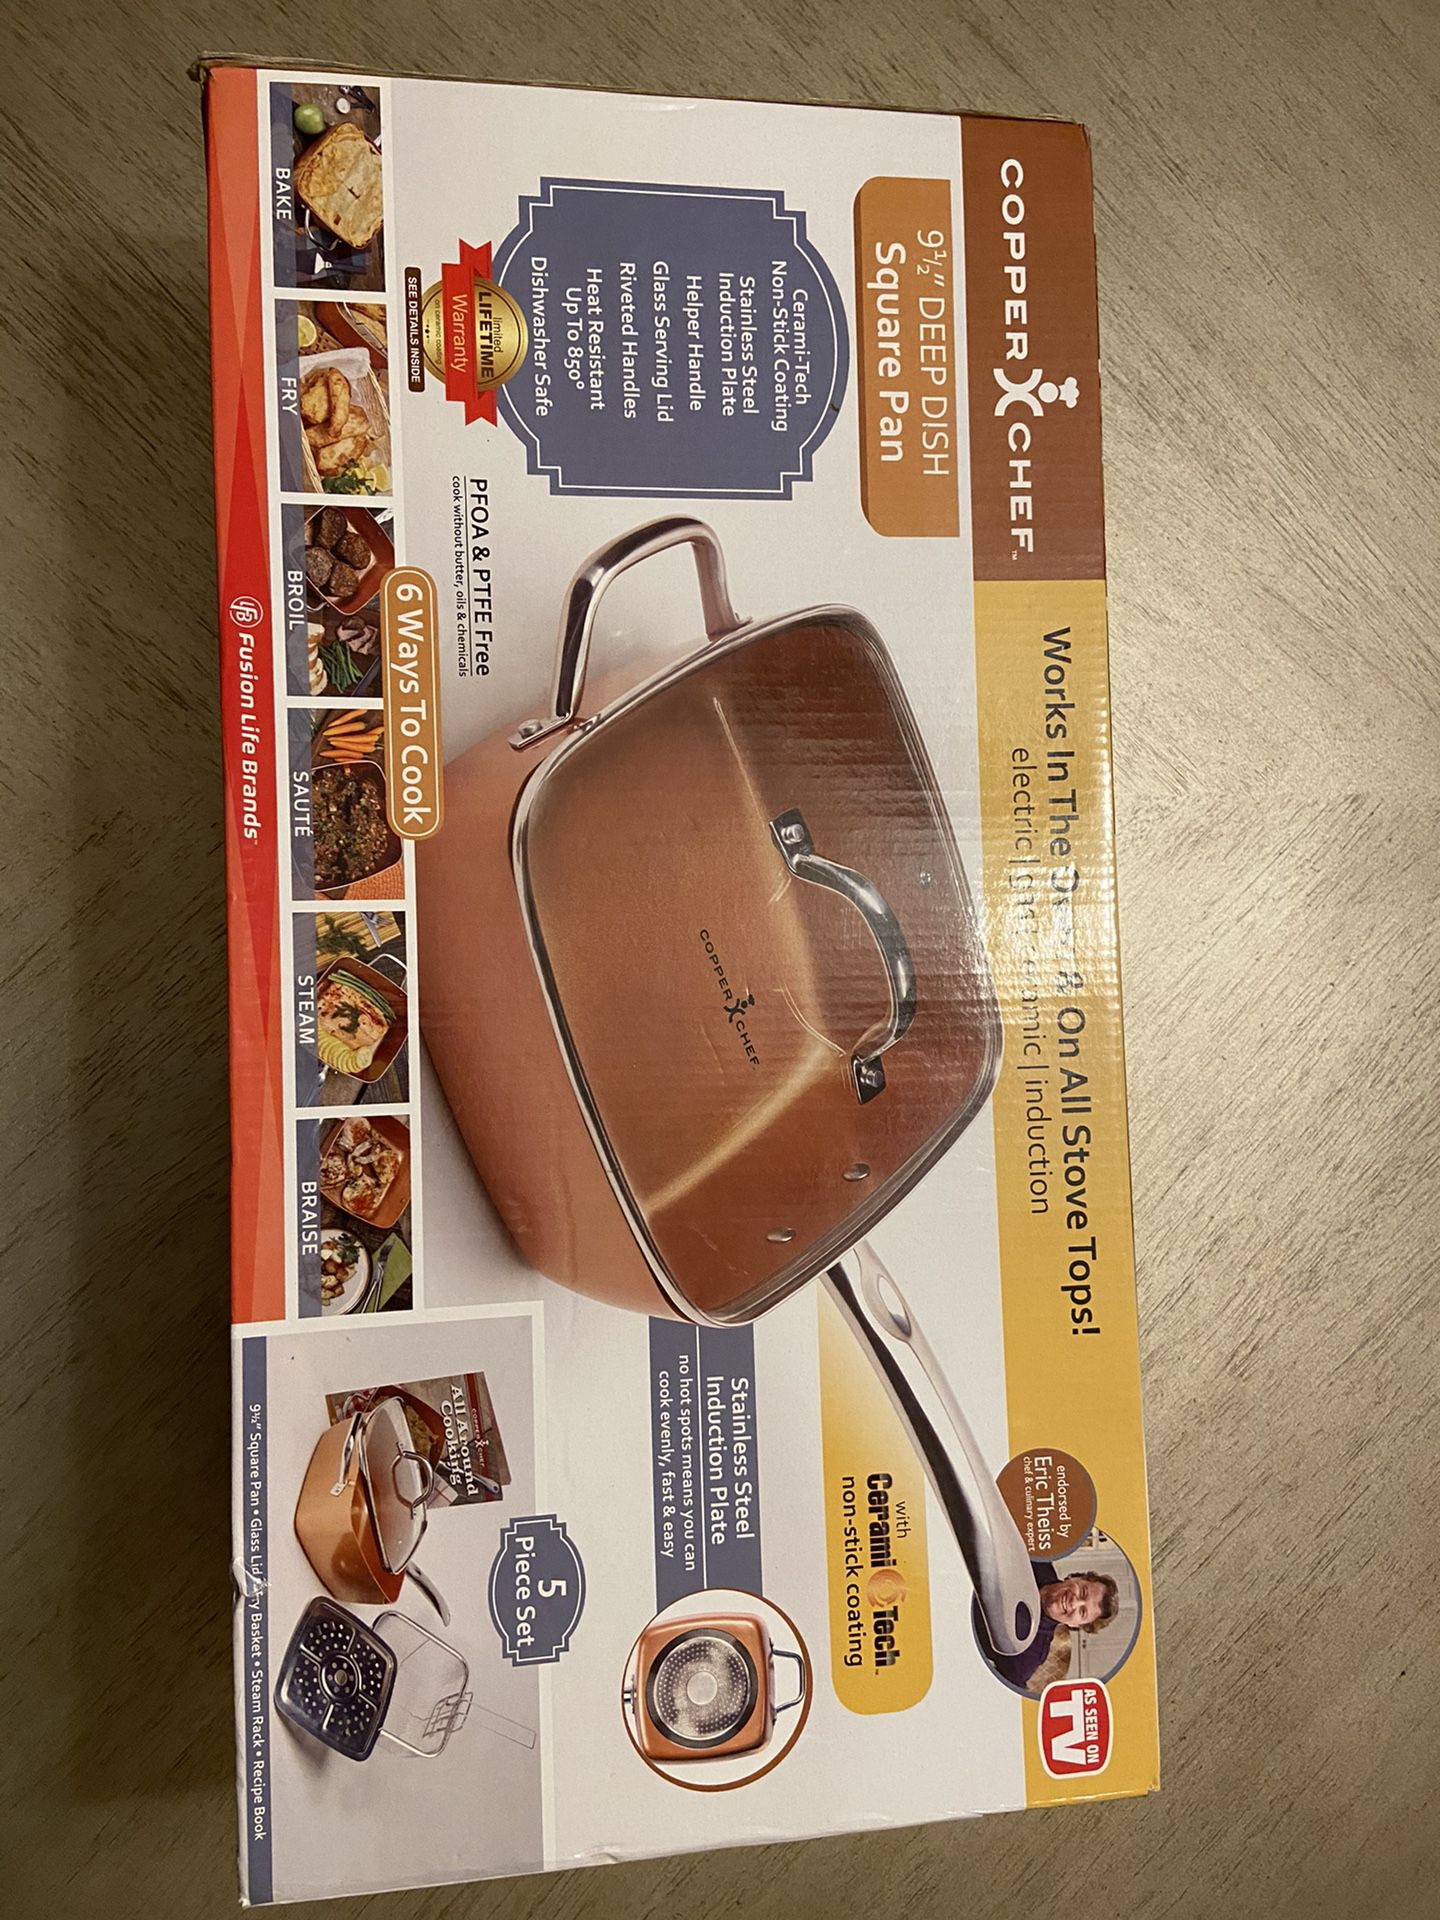 Copper Chef 9.5 Square Pan with Lid, Fry Basket, Steam Rack & Recipes on  QVC 